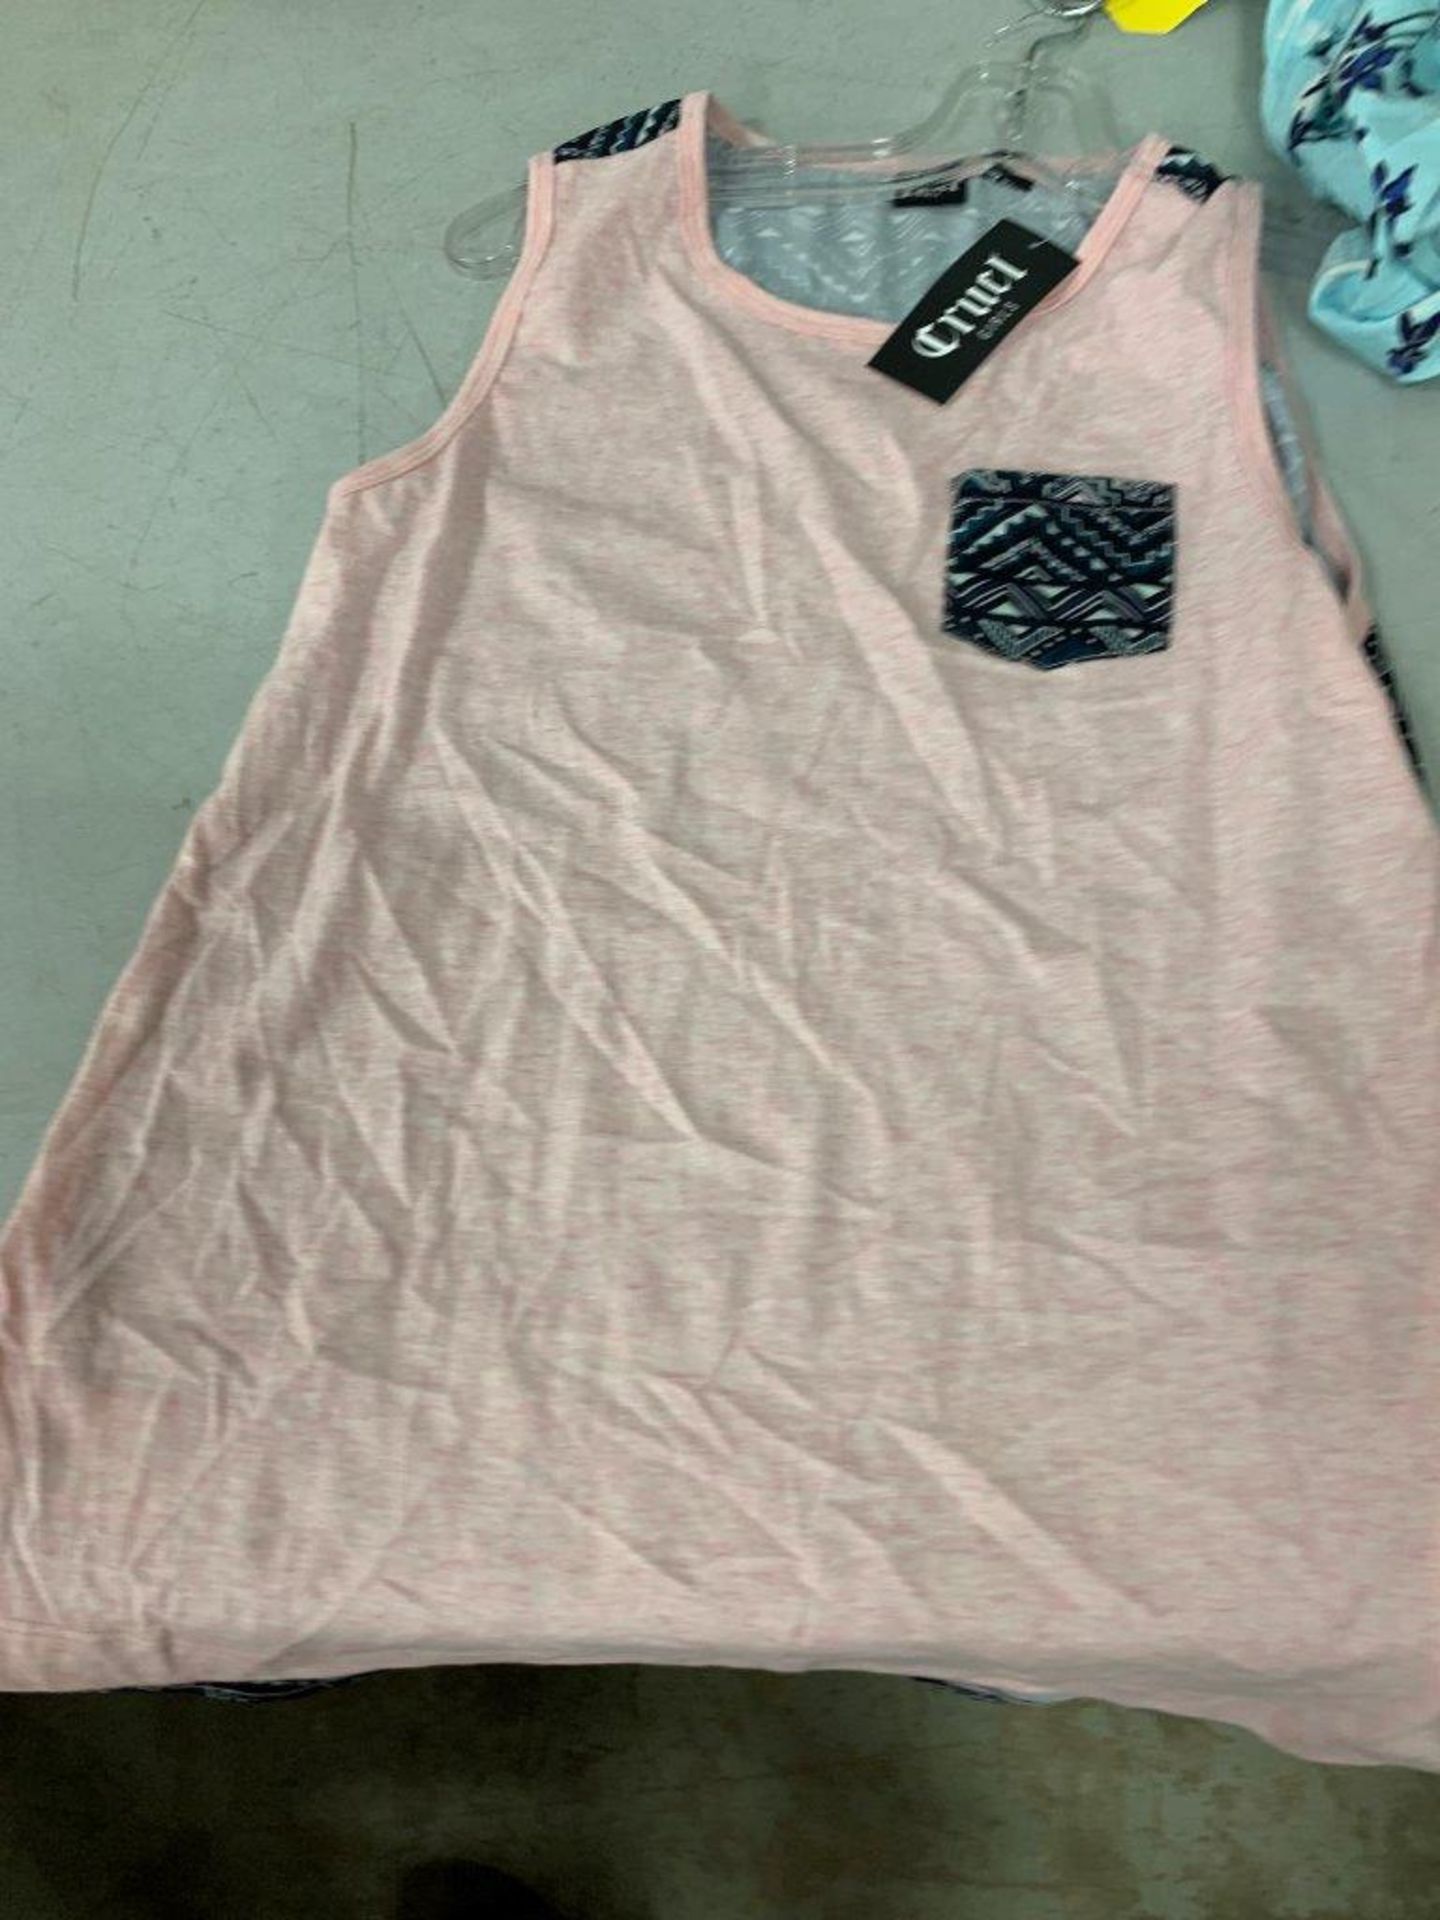 L/O 3 - SIZE 14-16 YOUTH TANK TOPS - Image 3 of 3